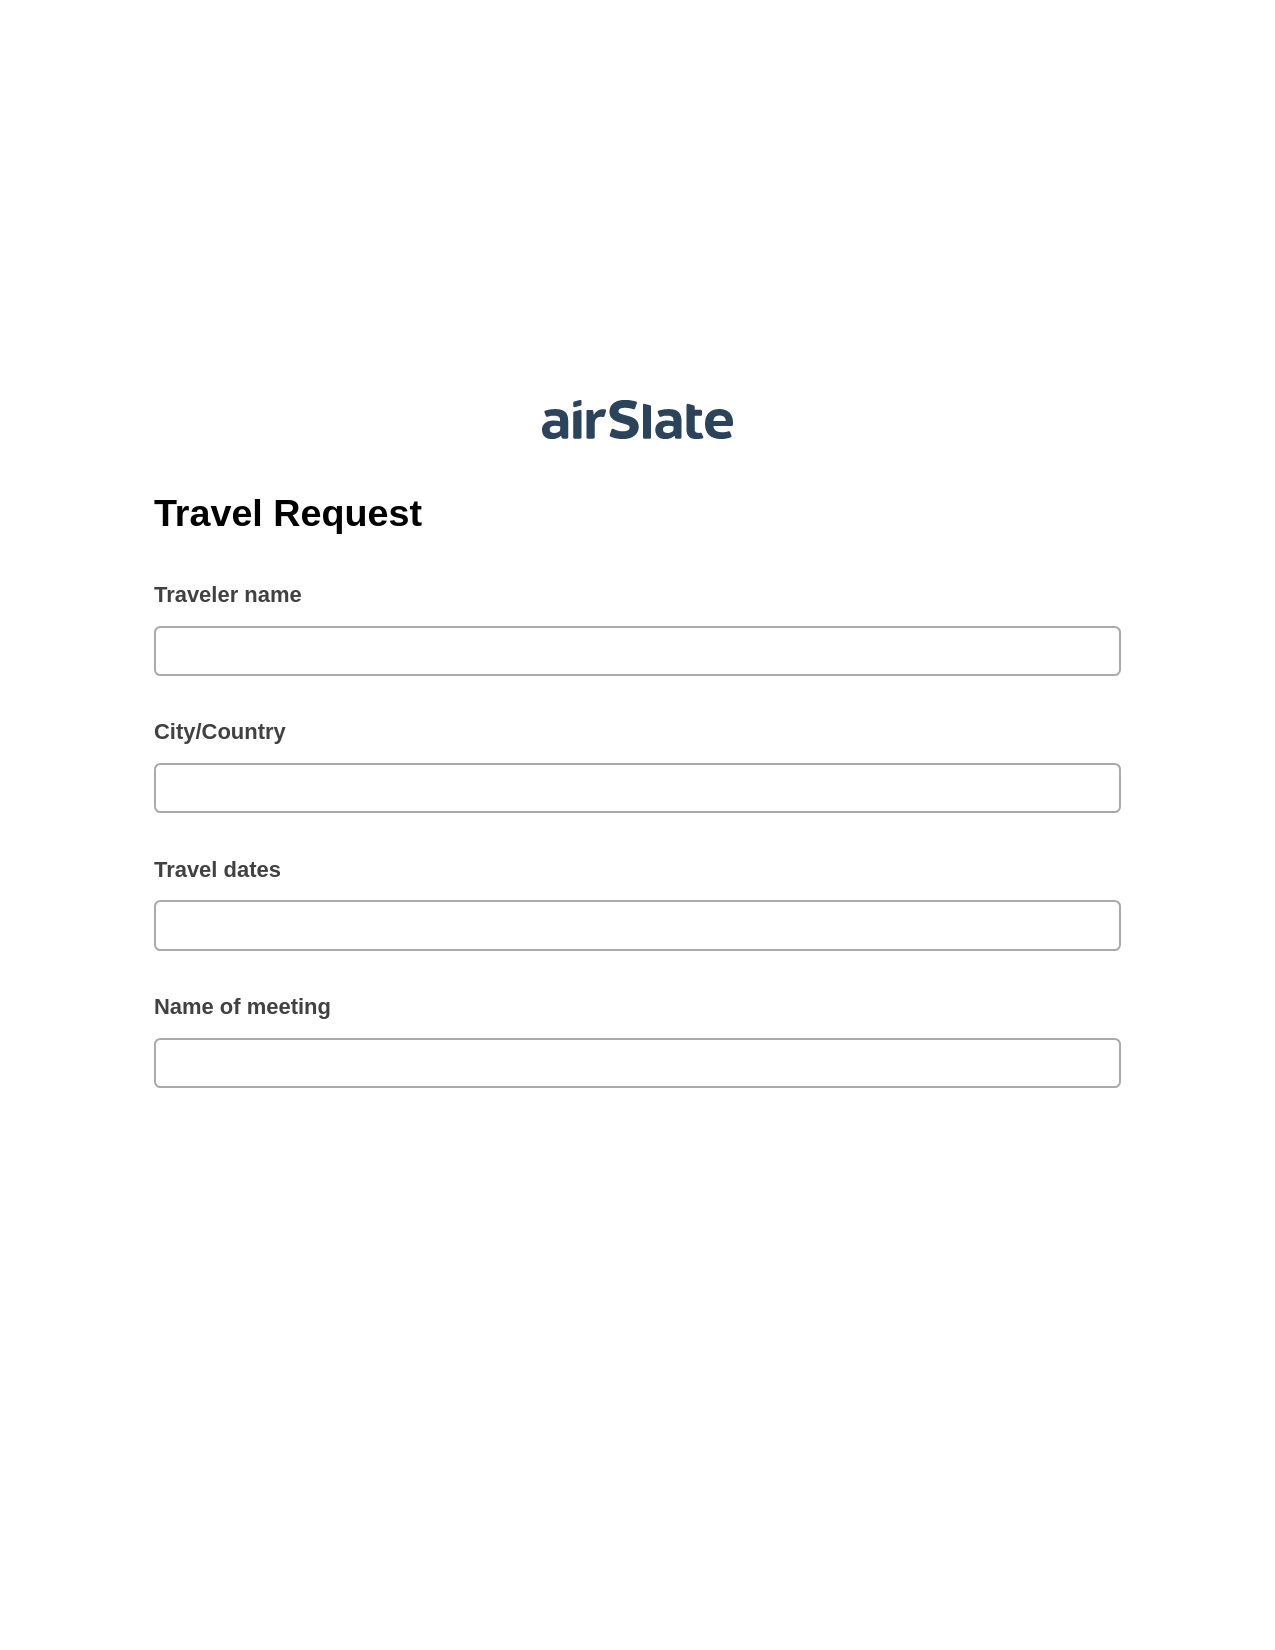 Travel Request Pre-fill Slate from MS Dynamics 365 Records Bot, Assign Roles to Recipients Bot, OneDrive Bot